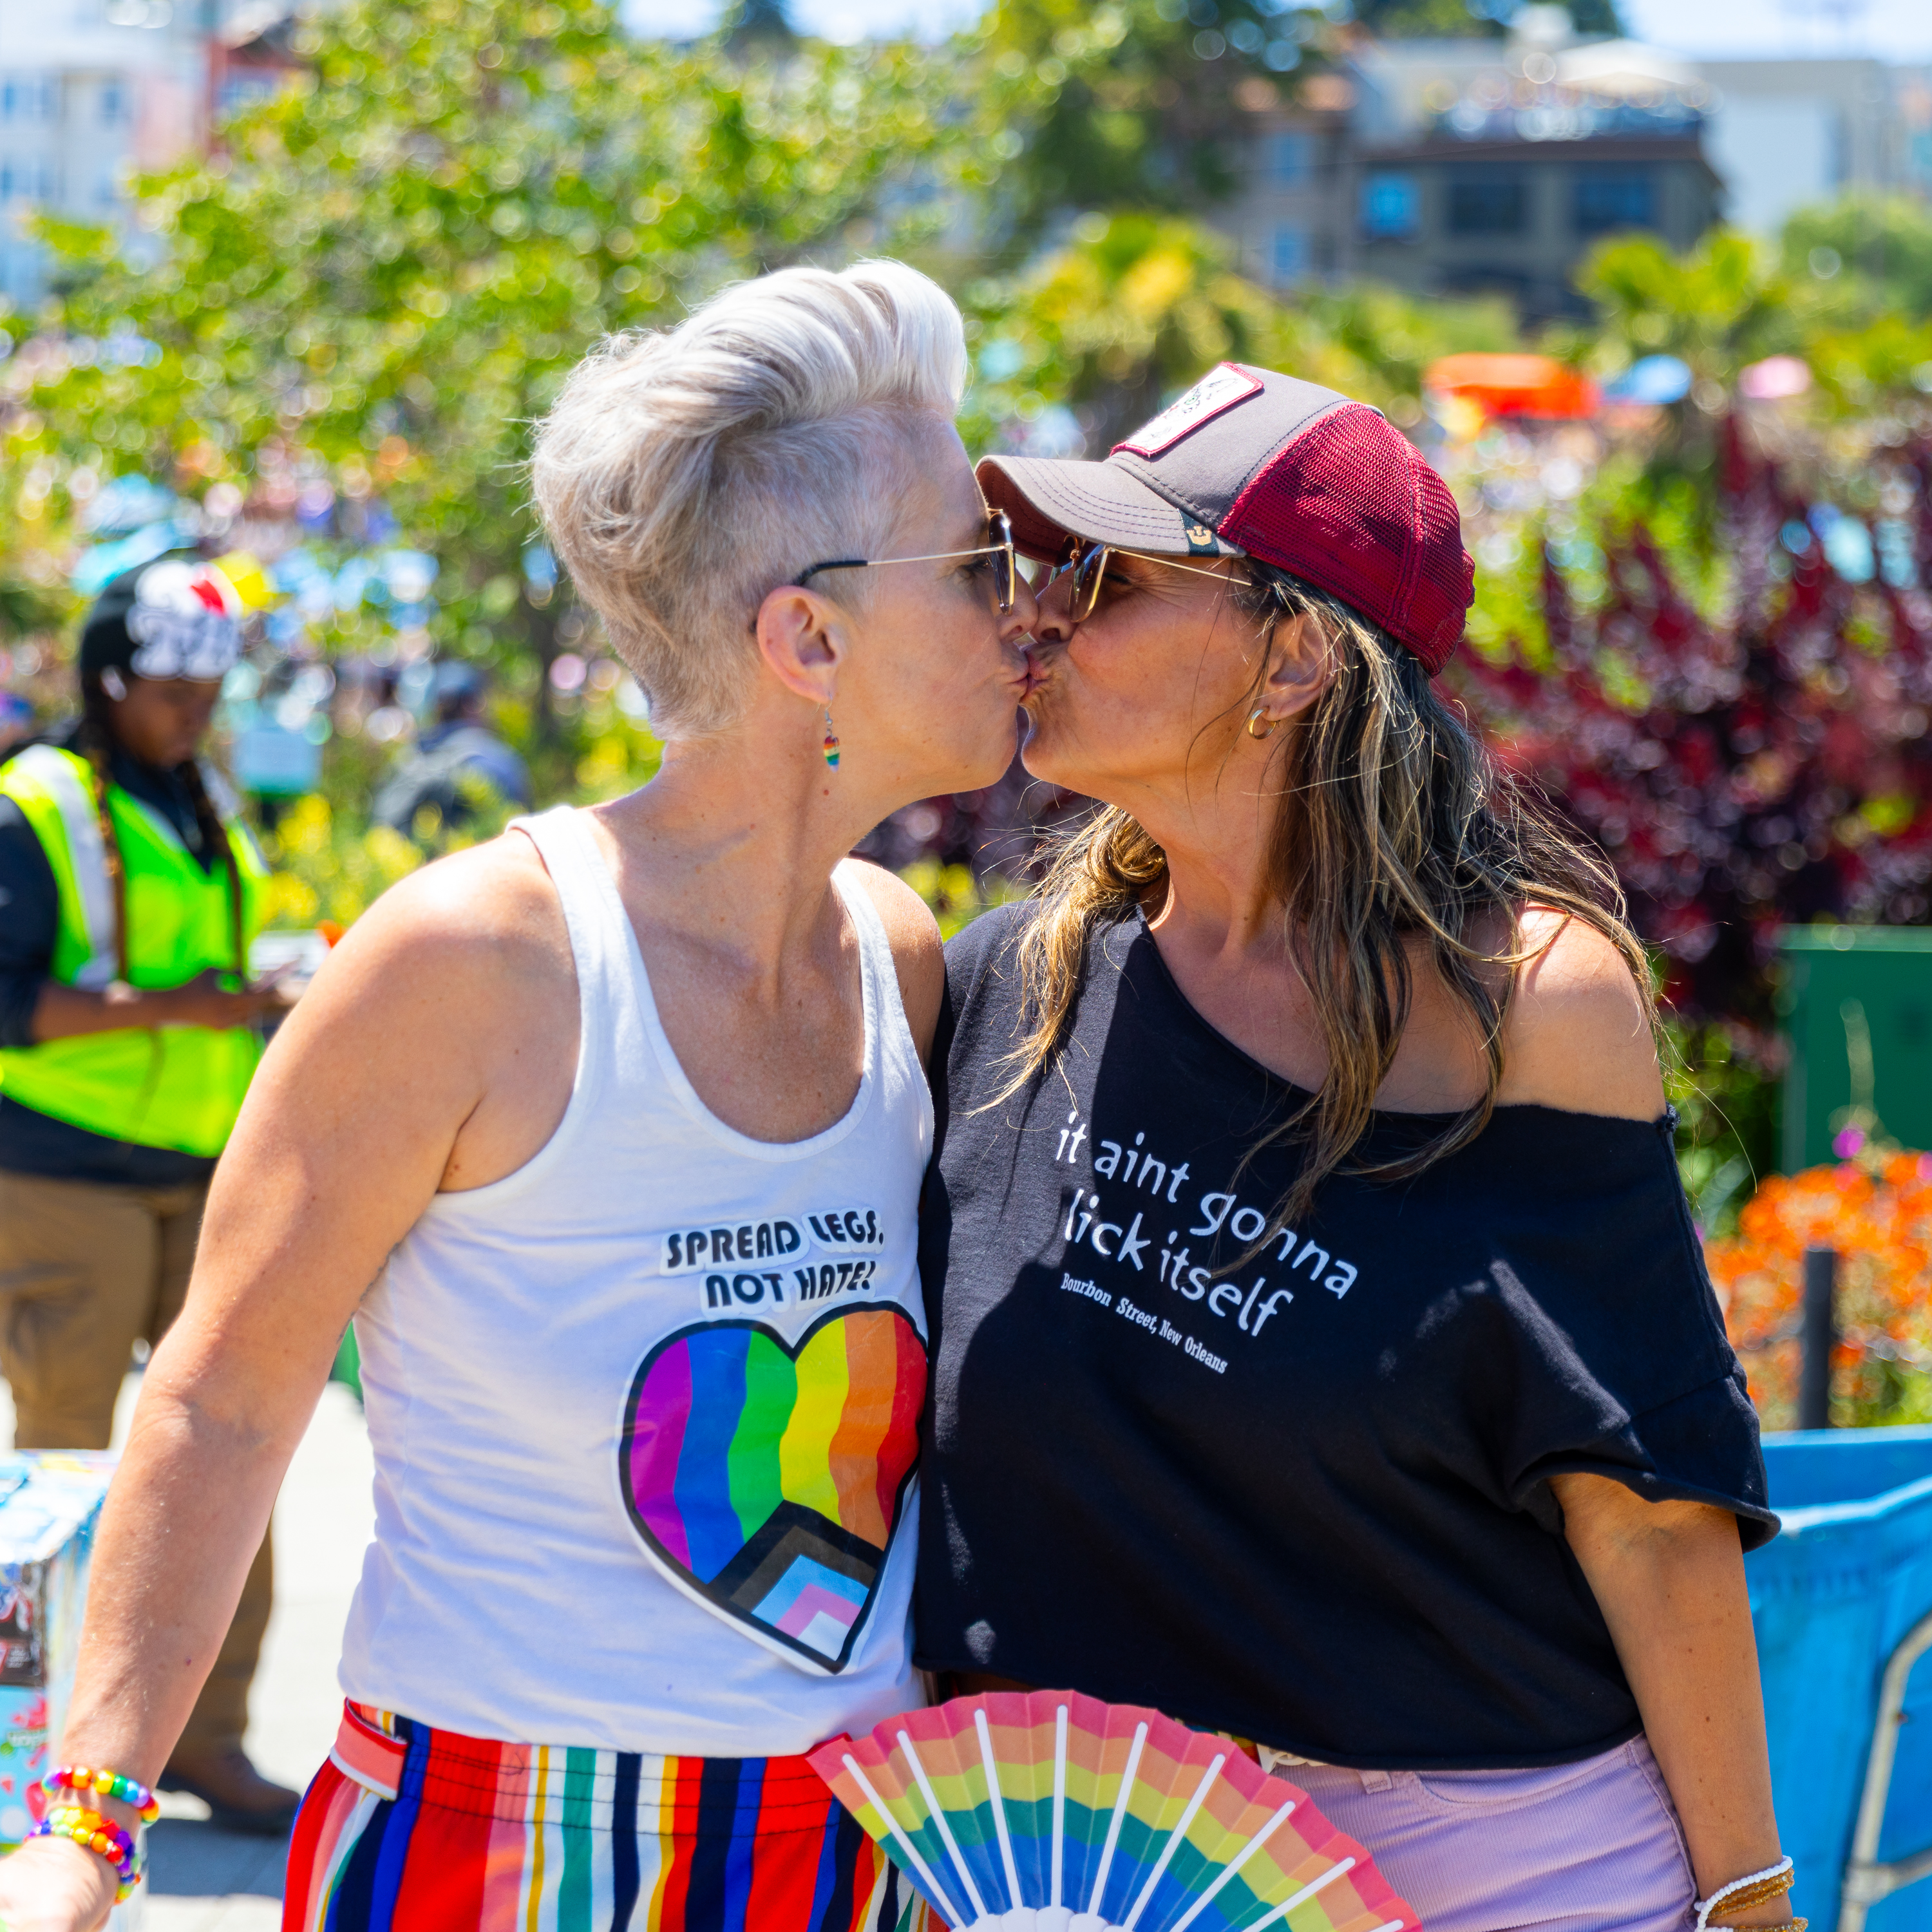 Two women wearing colorful outfits are kissing at an outdoor event. The woman on the left has short white hair, and the one on the right wears a hat and holds a rainbow fan.